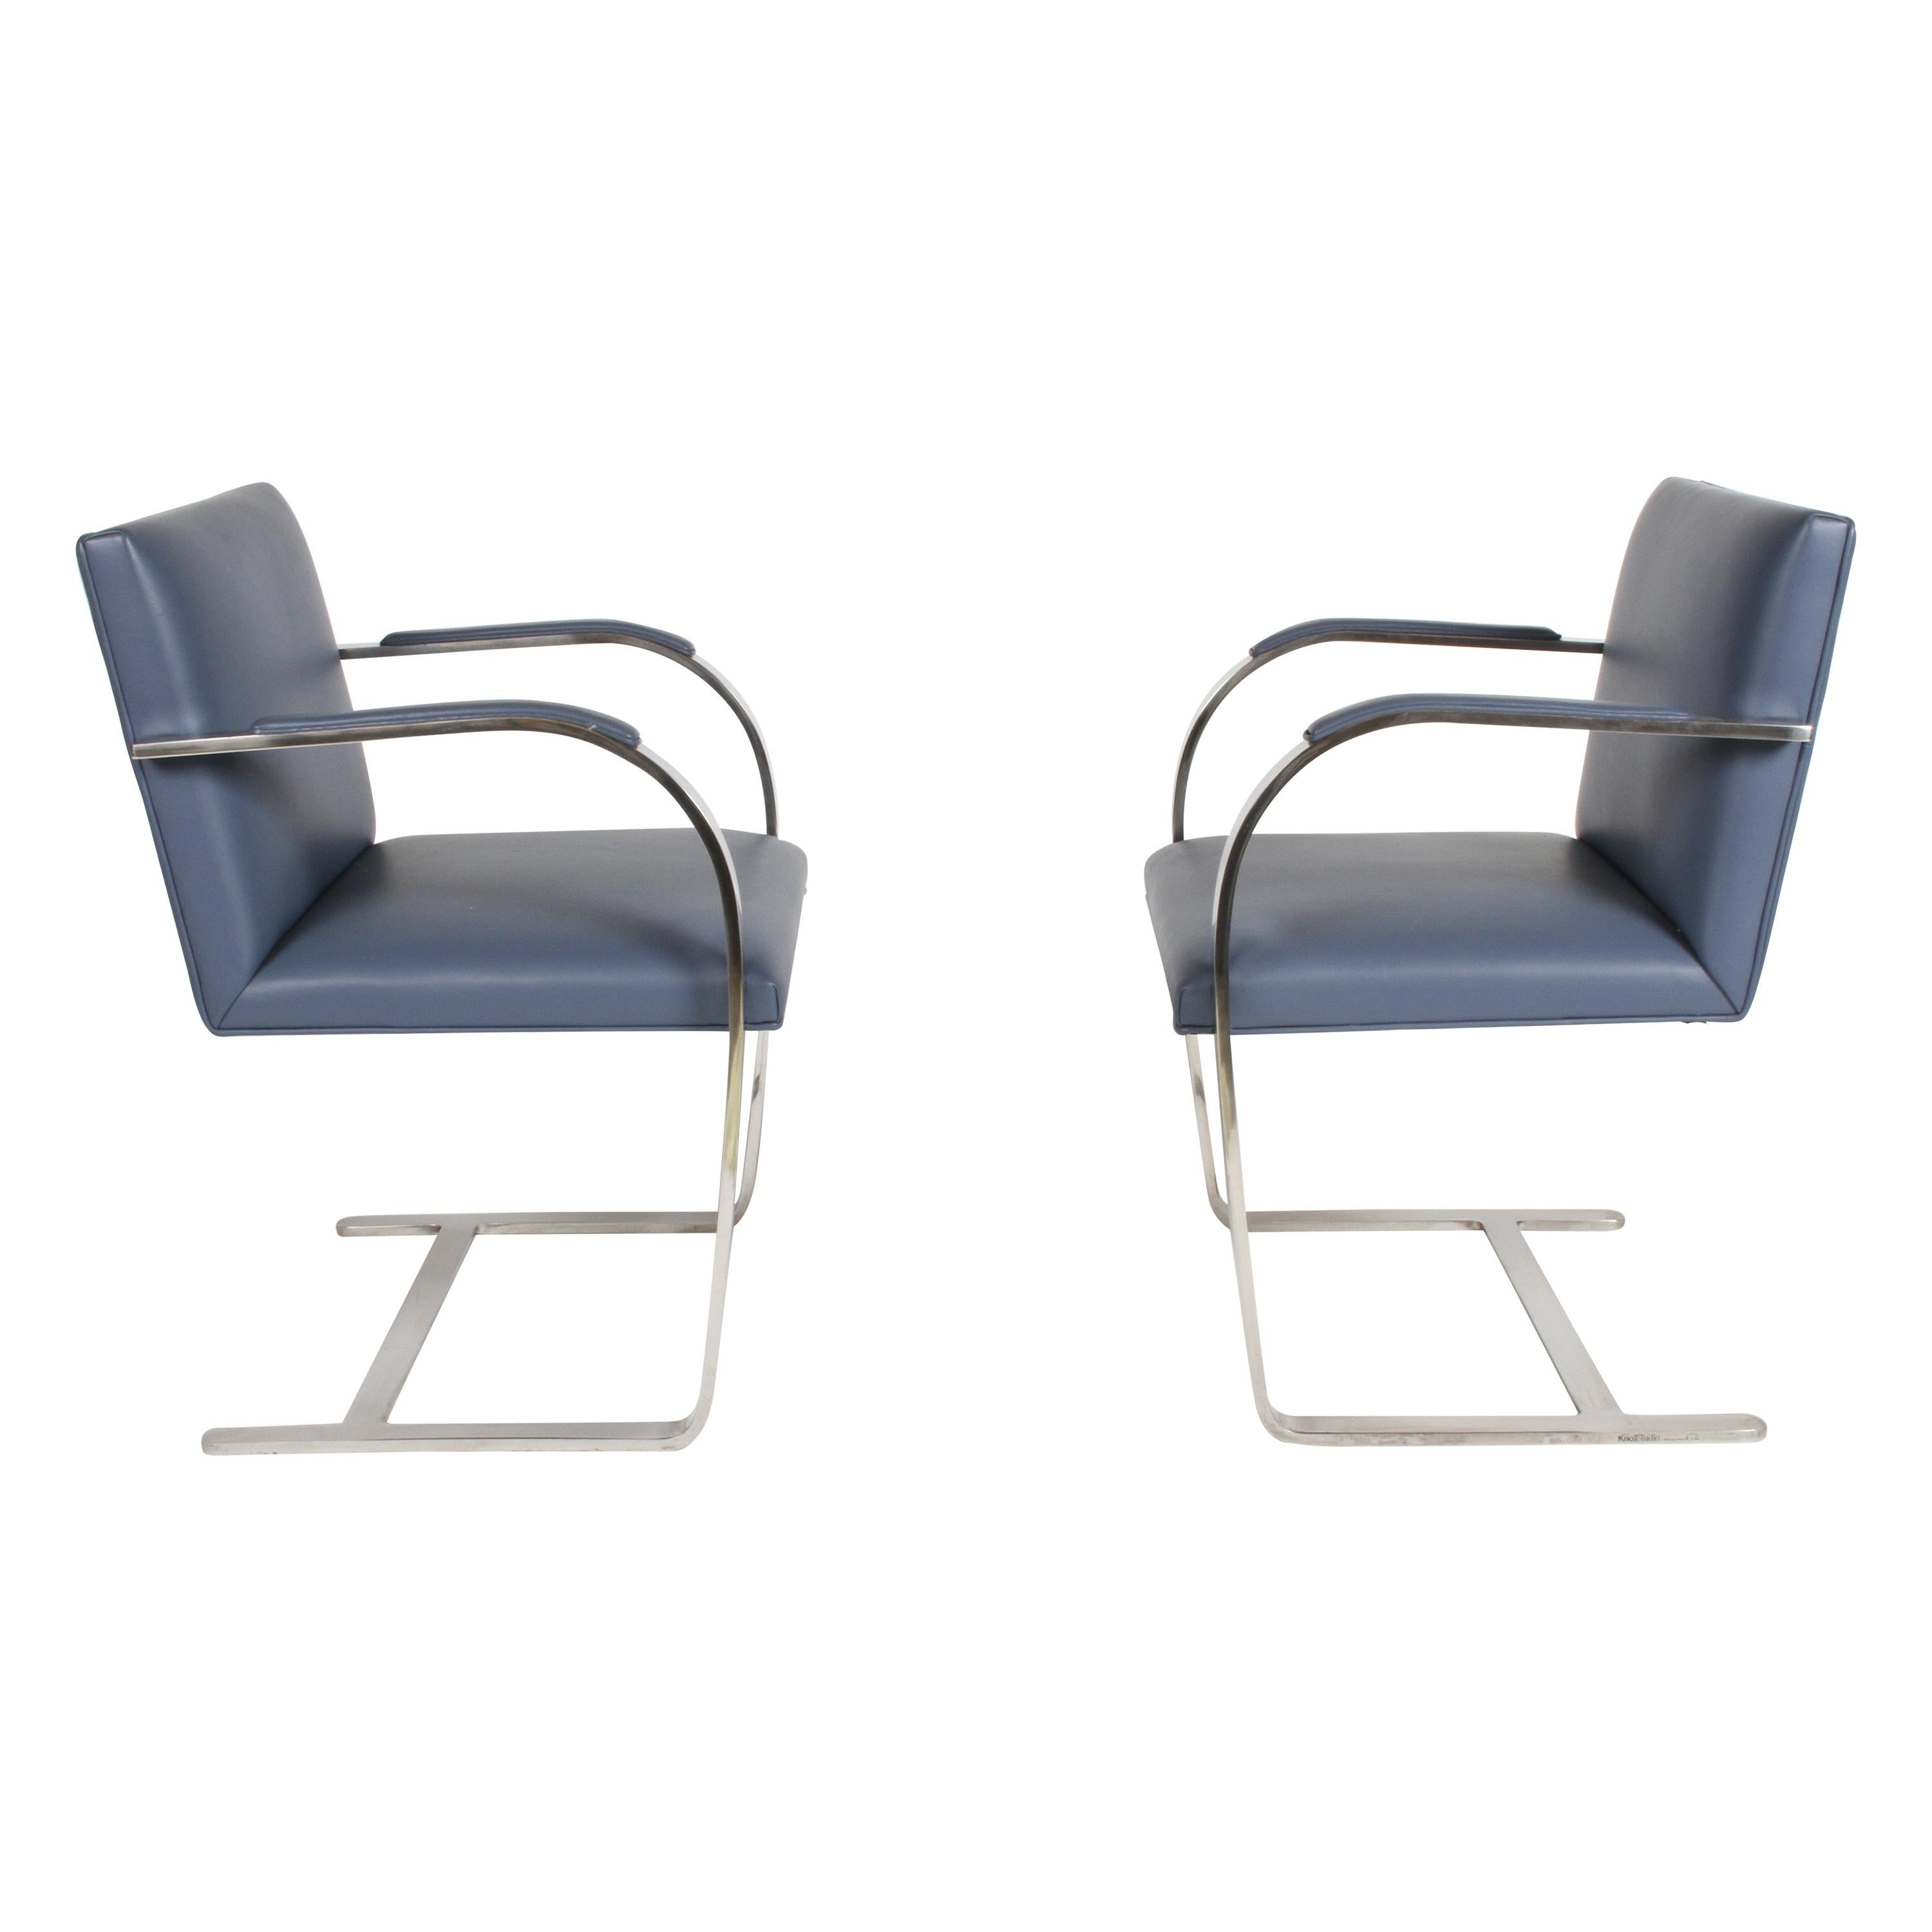 Mies van der Rohe Flat Bar Brno Chairs by Knoll, Stainless